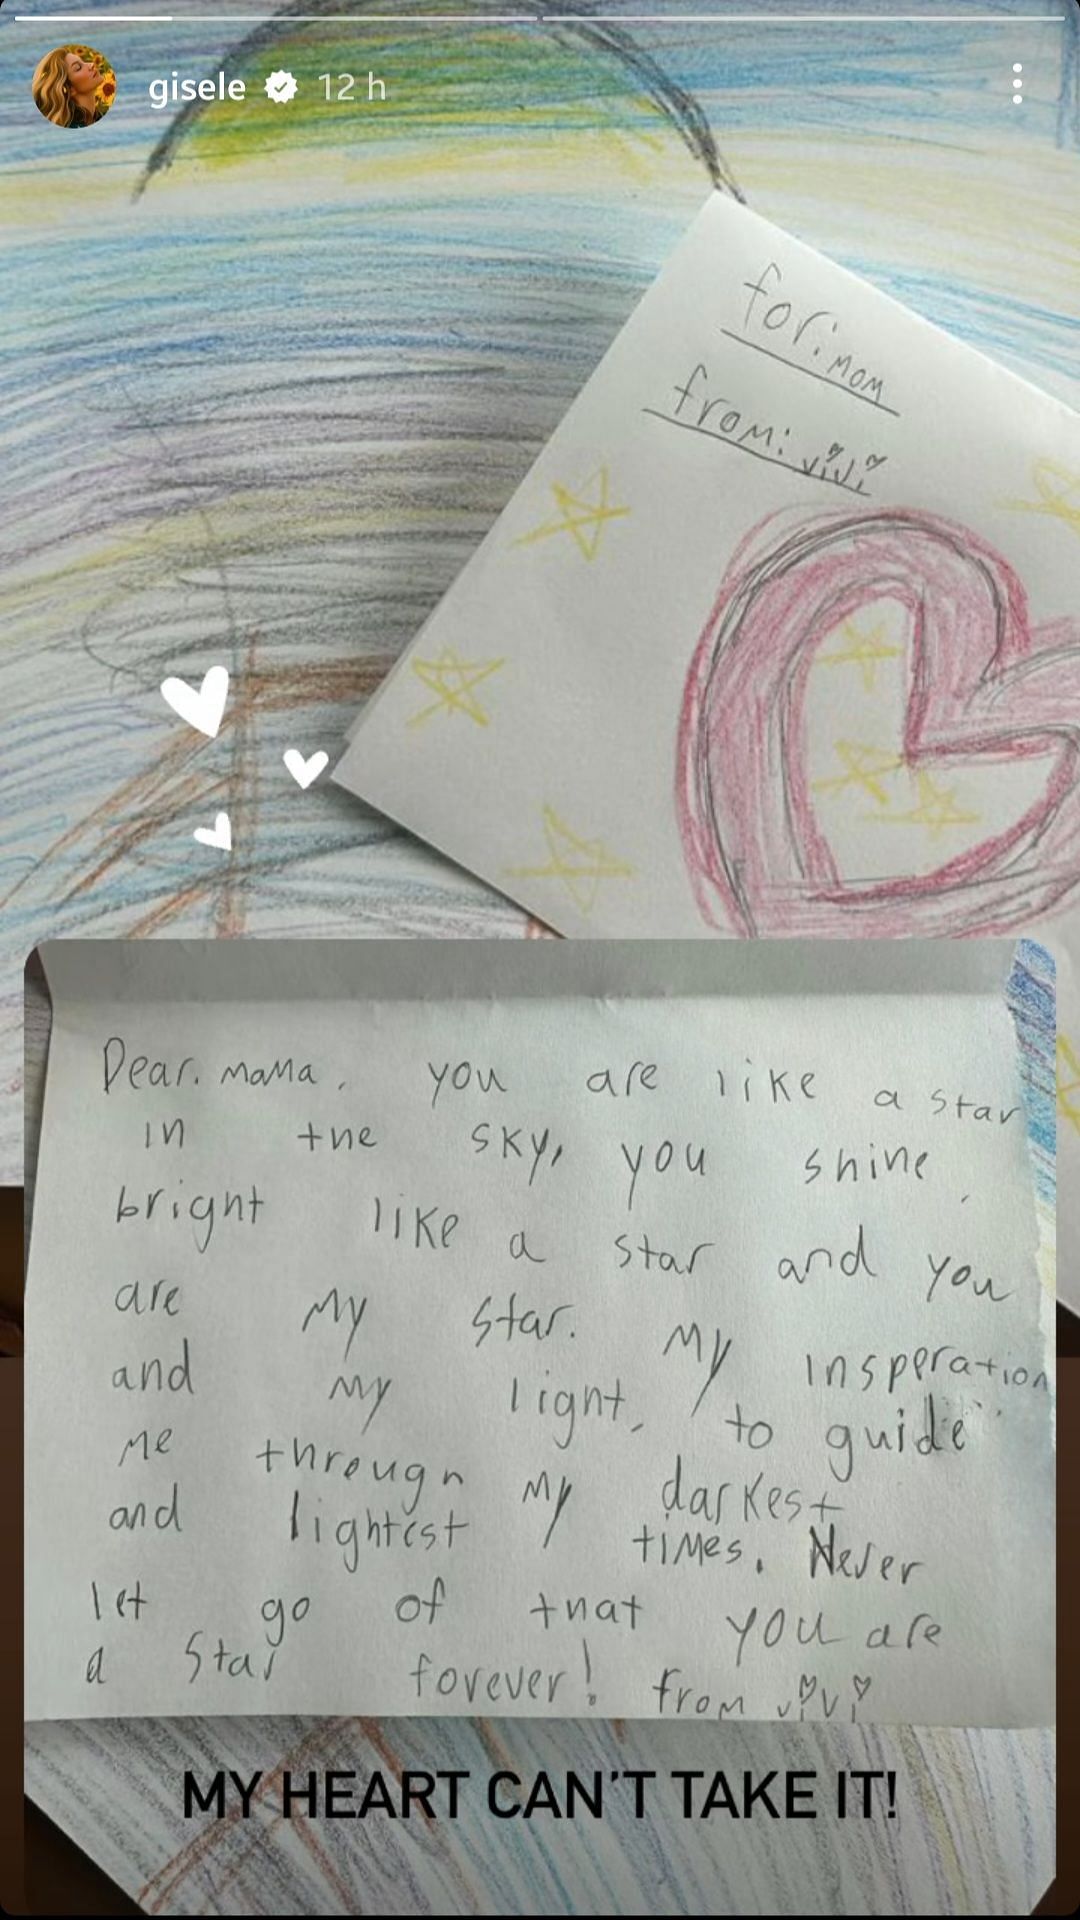 Gisele Bundchen shared the letter she received from her daughter, Vivian Lake, during Mother&#039;s Day. (Image credit: instagram.com/gisele)